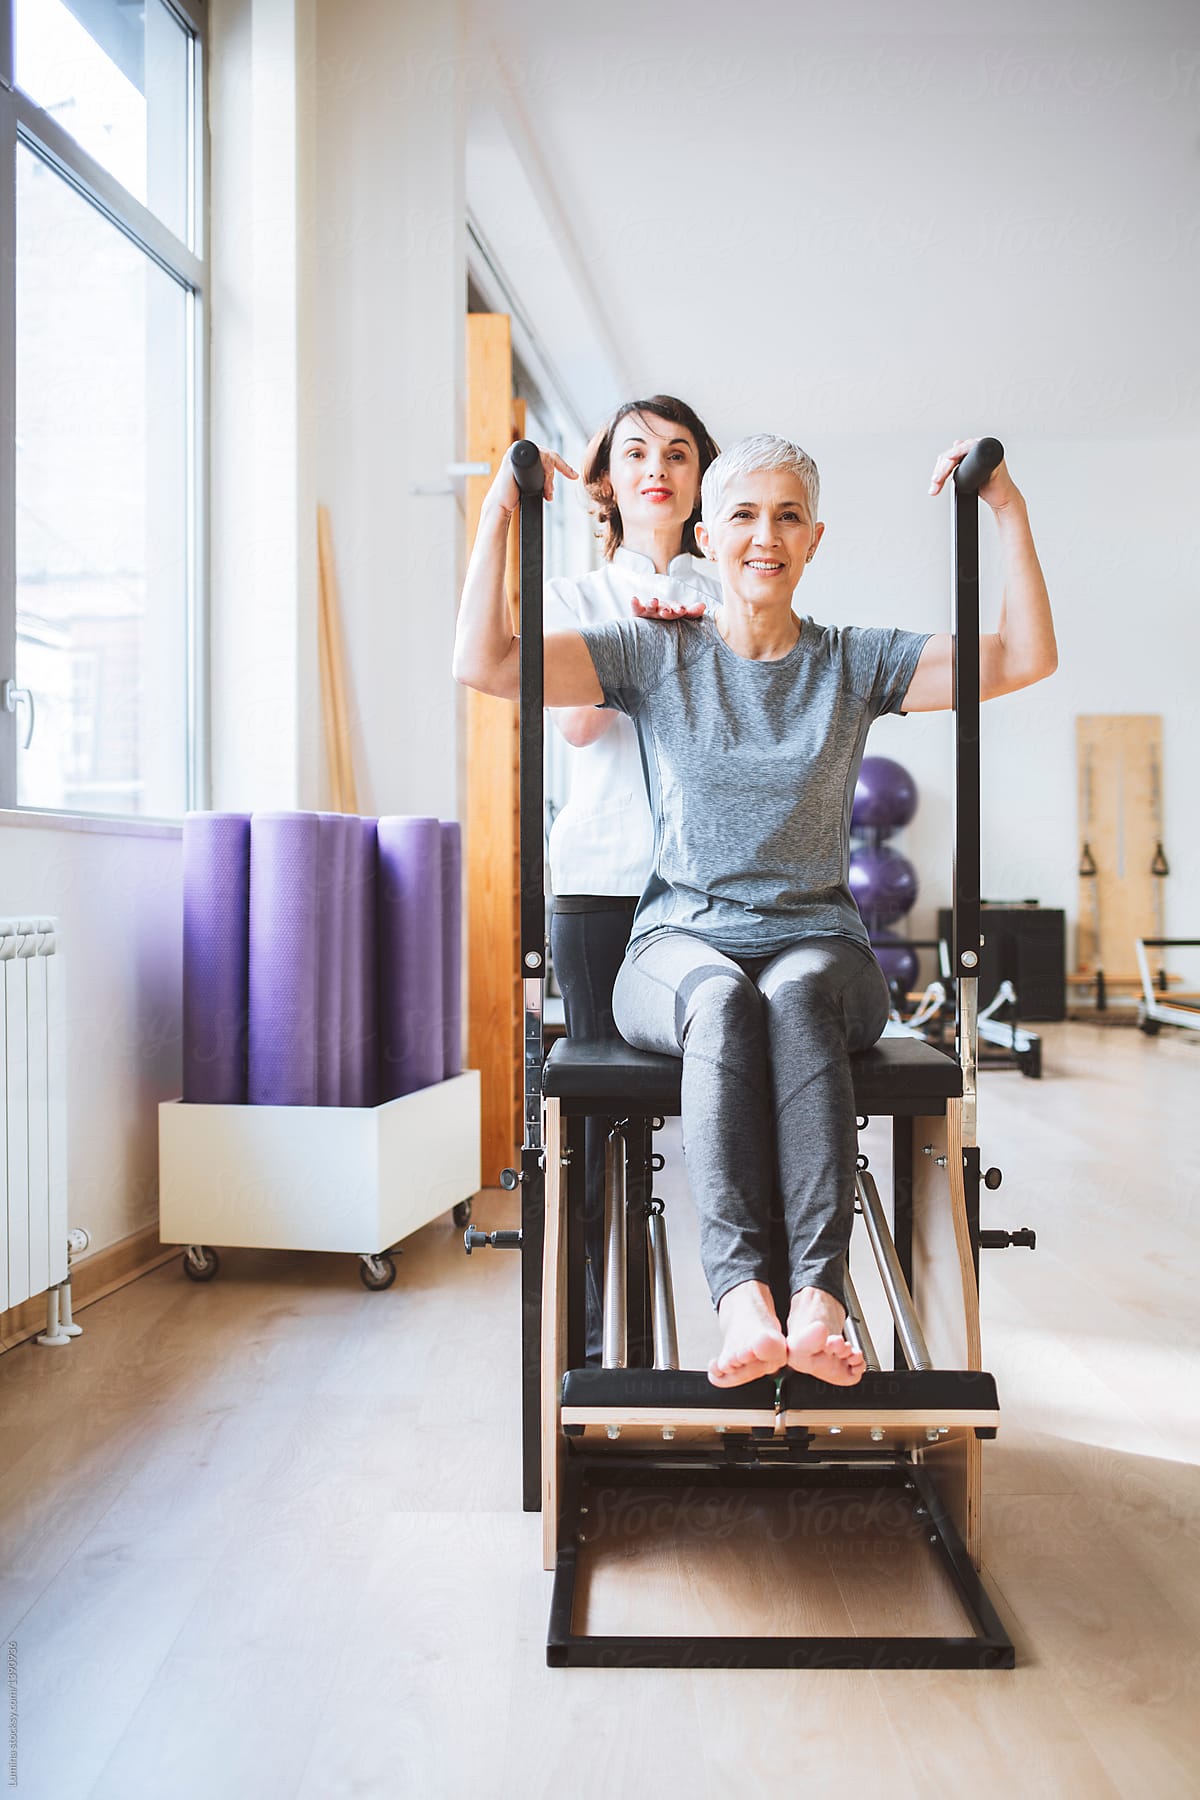 Woman Doing Back Exercise With Therapist By Stocksy Contributor